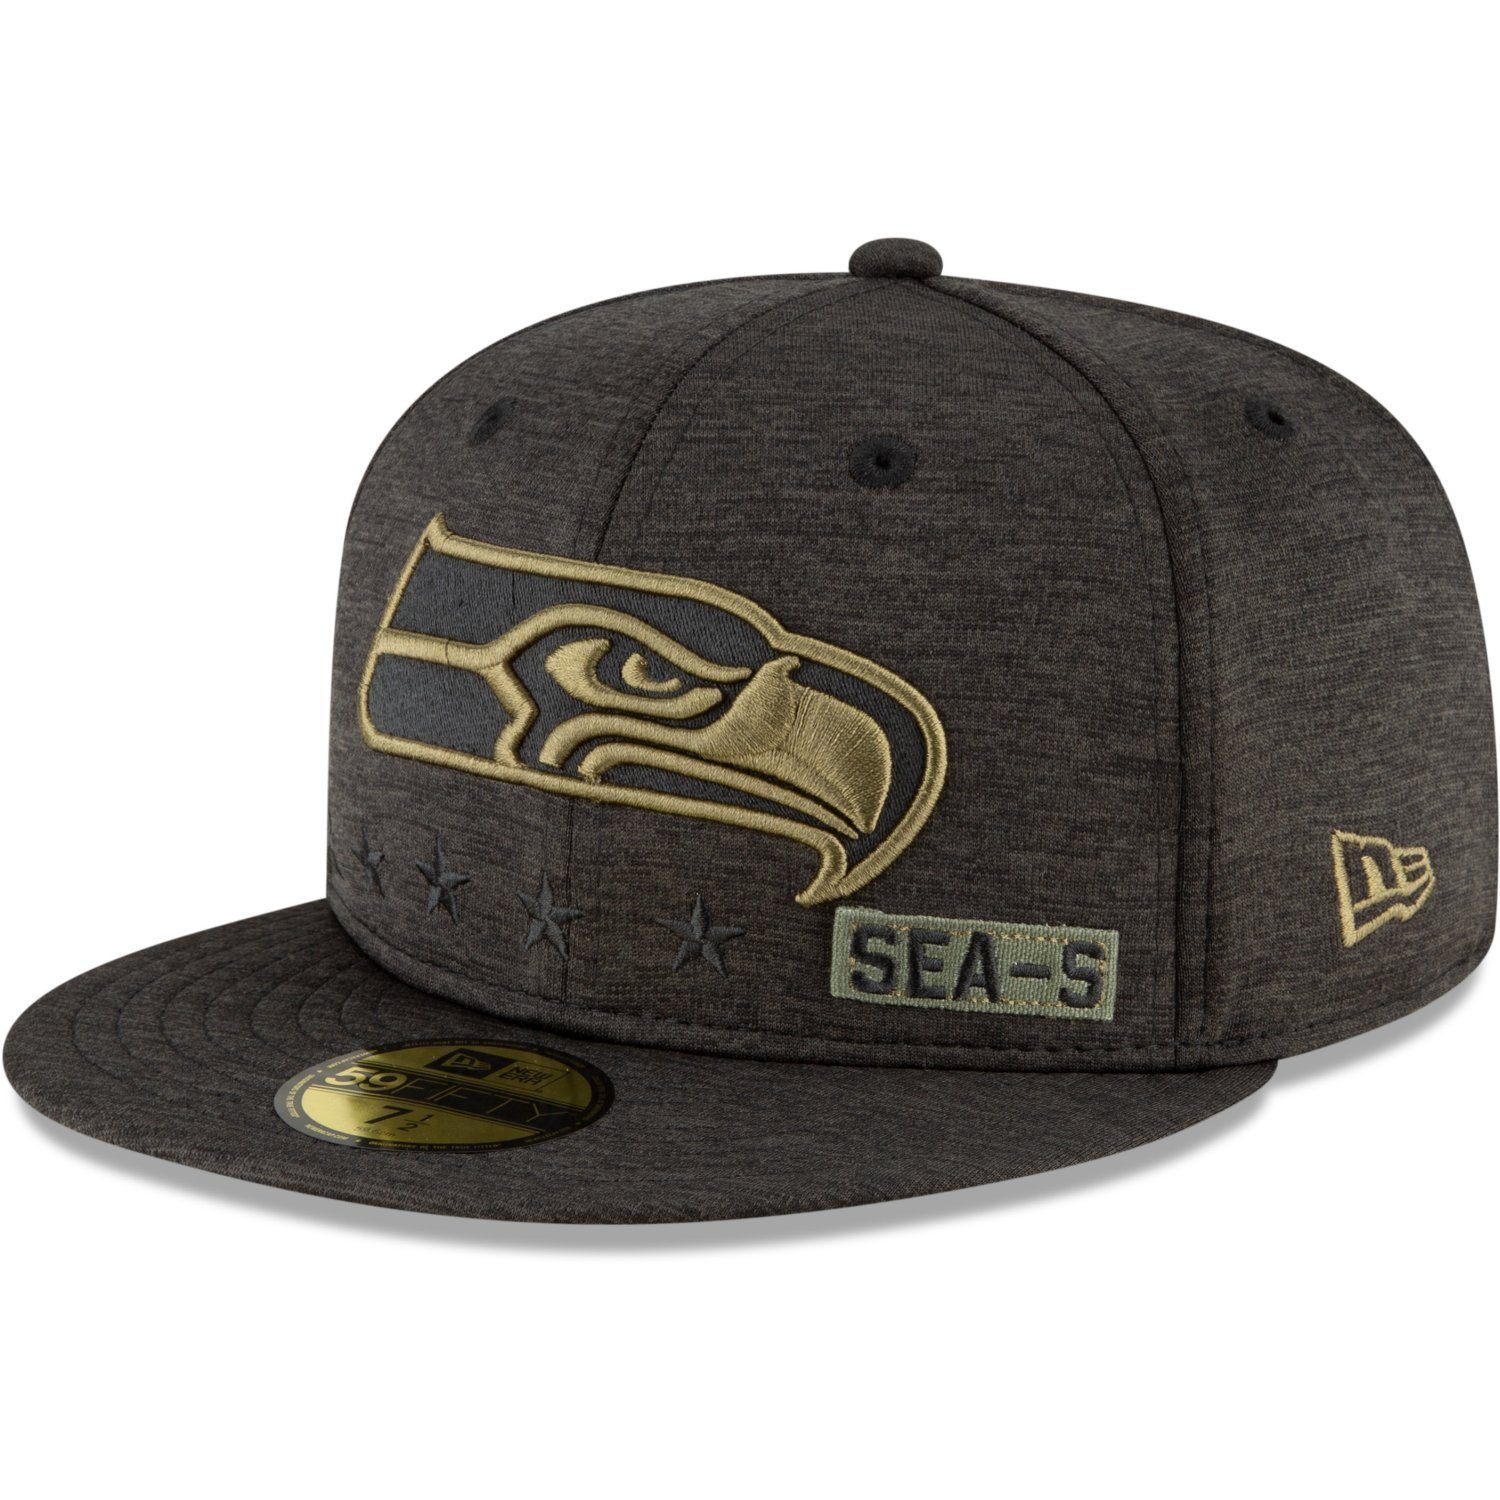 Service to New 2020 Seahawks Era Fitted Seattle Cap 59FIFTY Salute NFL